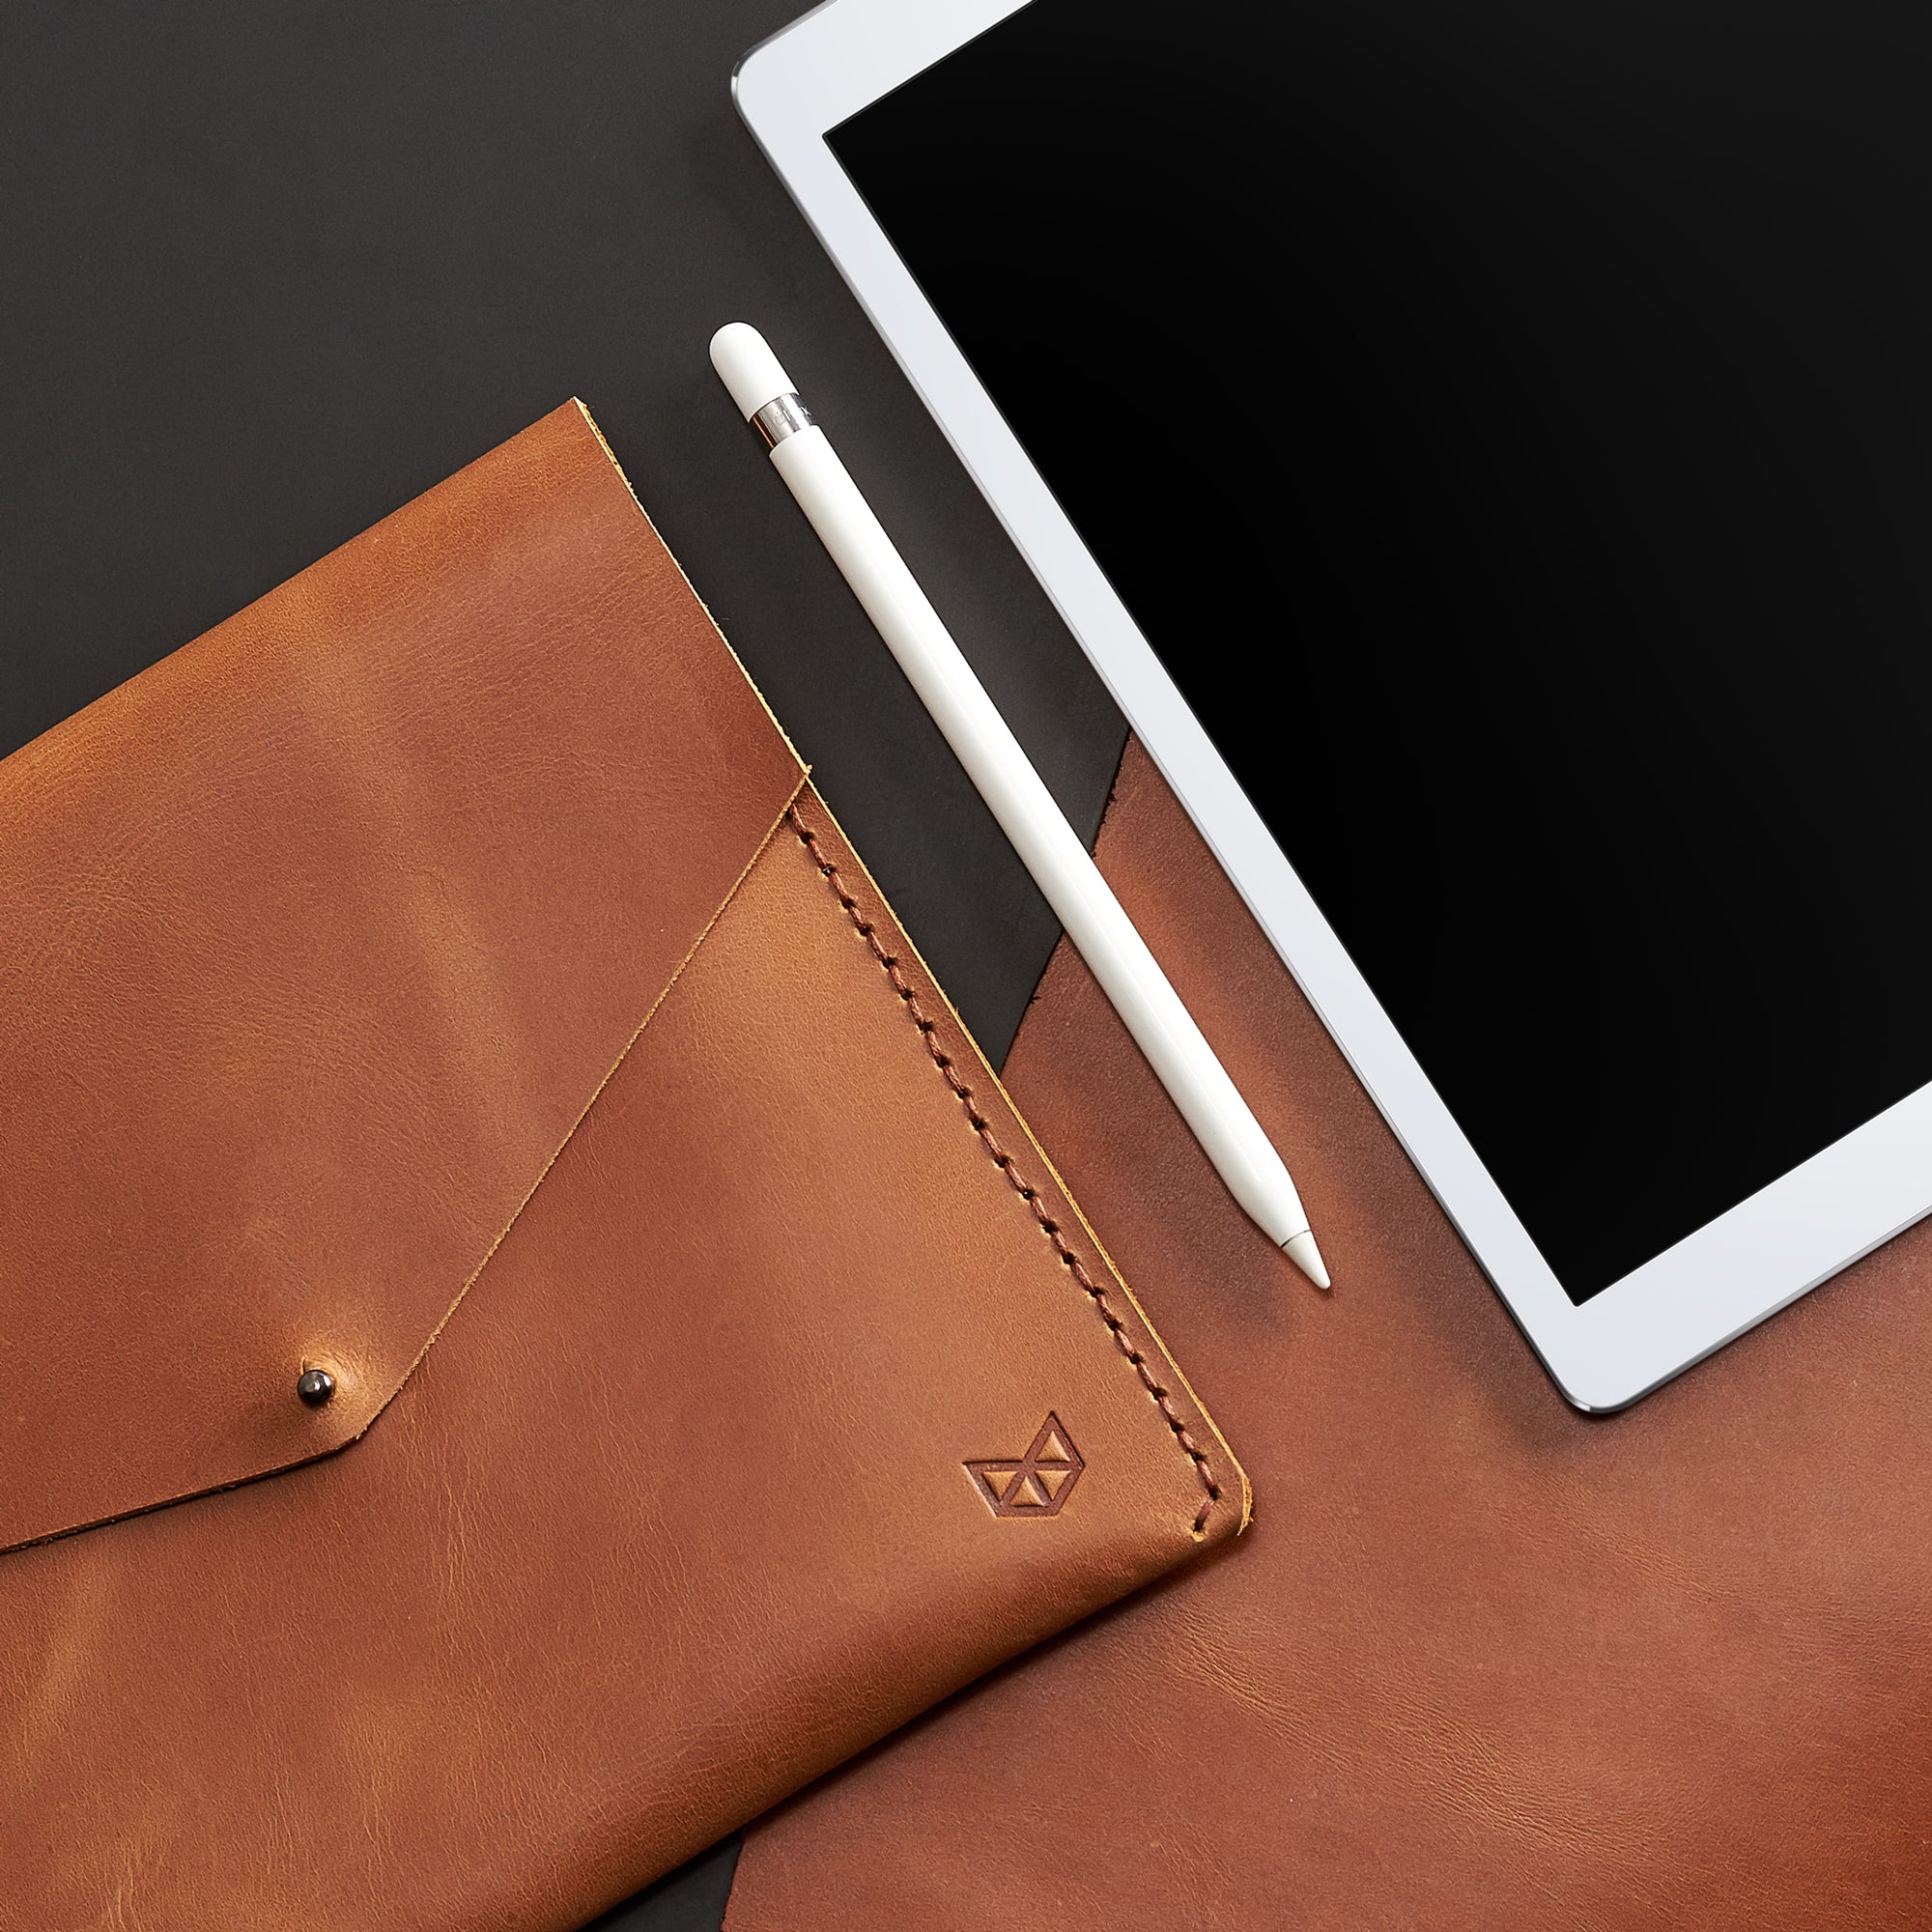 Apple Accessories. iPad Sleeve. iPad Leather Case Tan With Apple Pencil Holder by Capra Leather